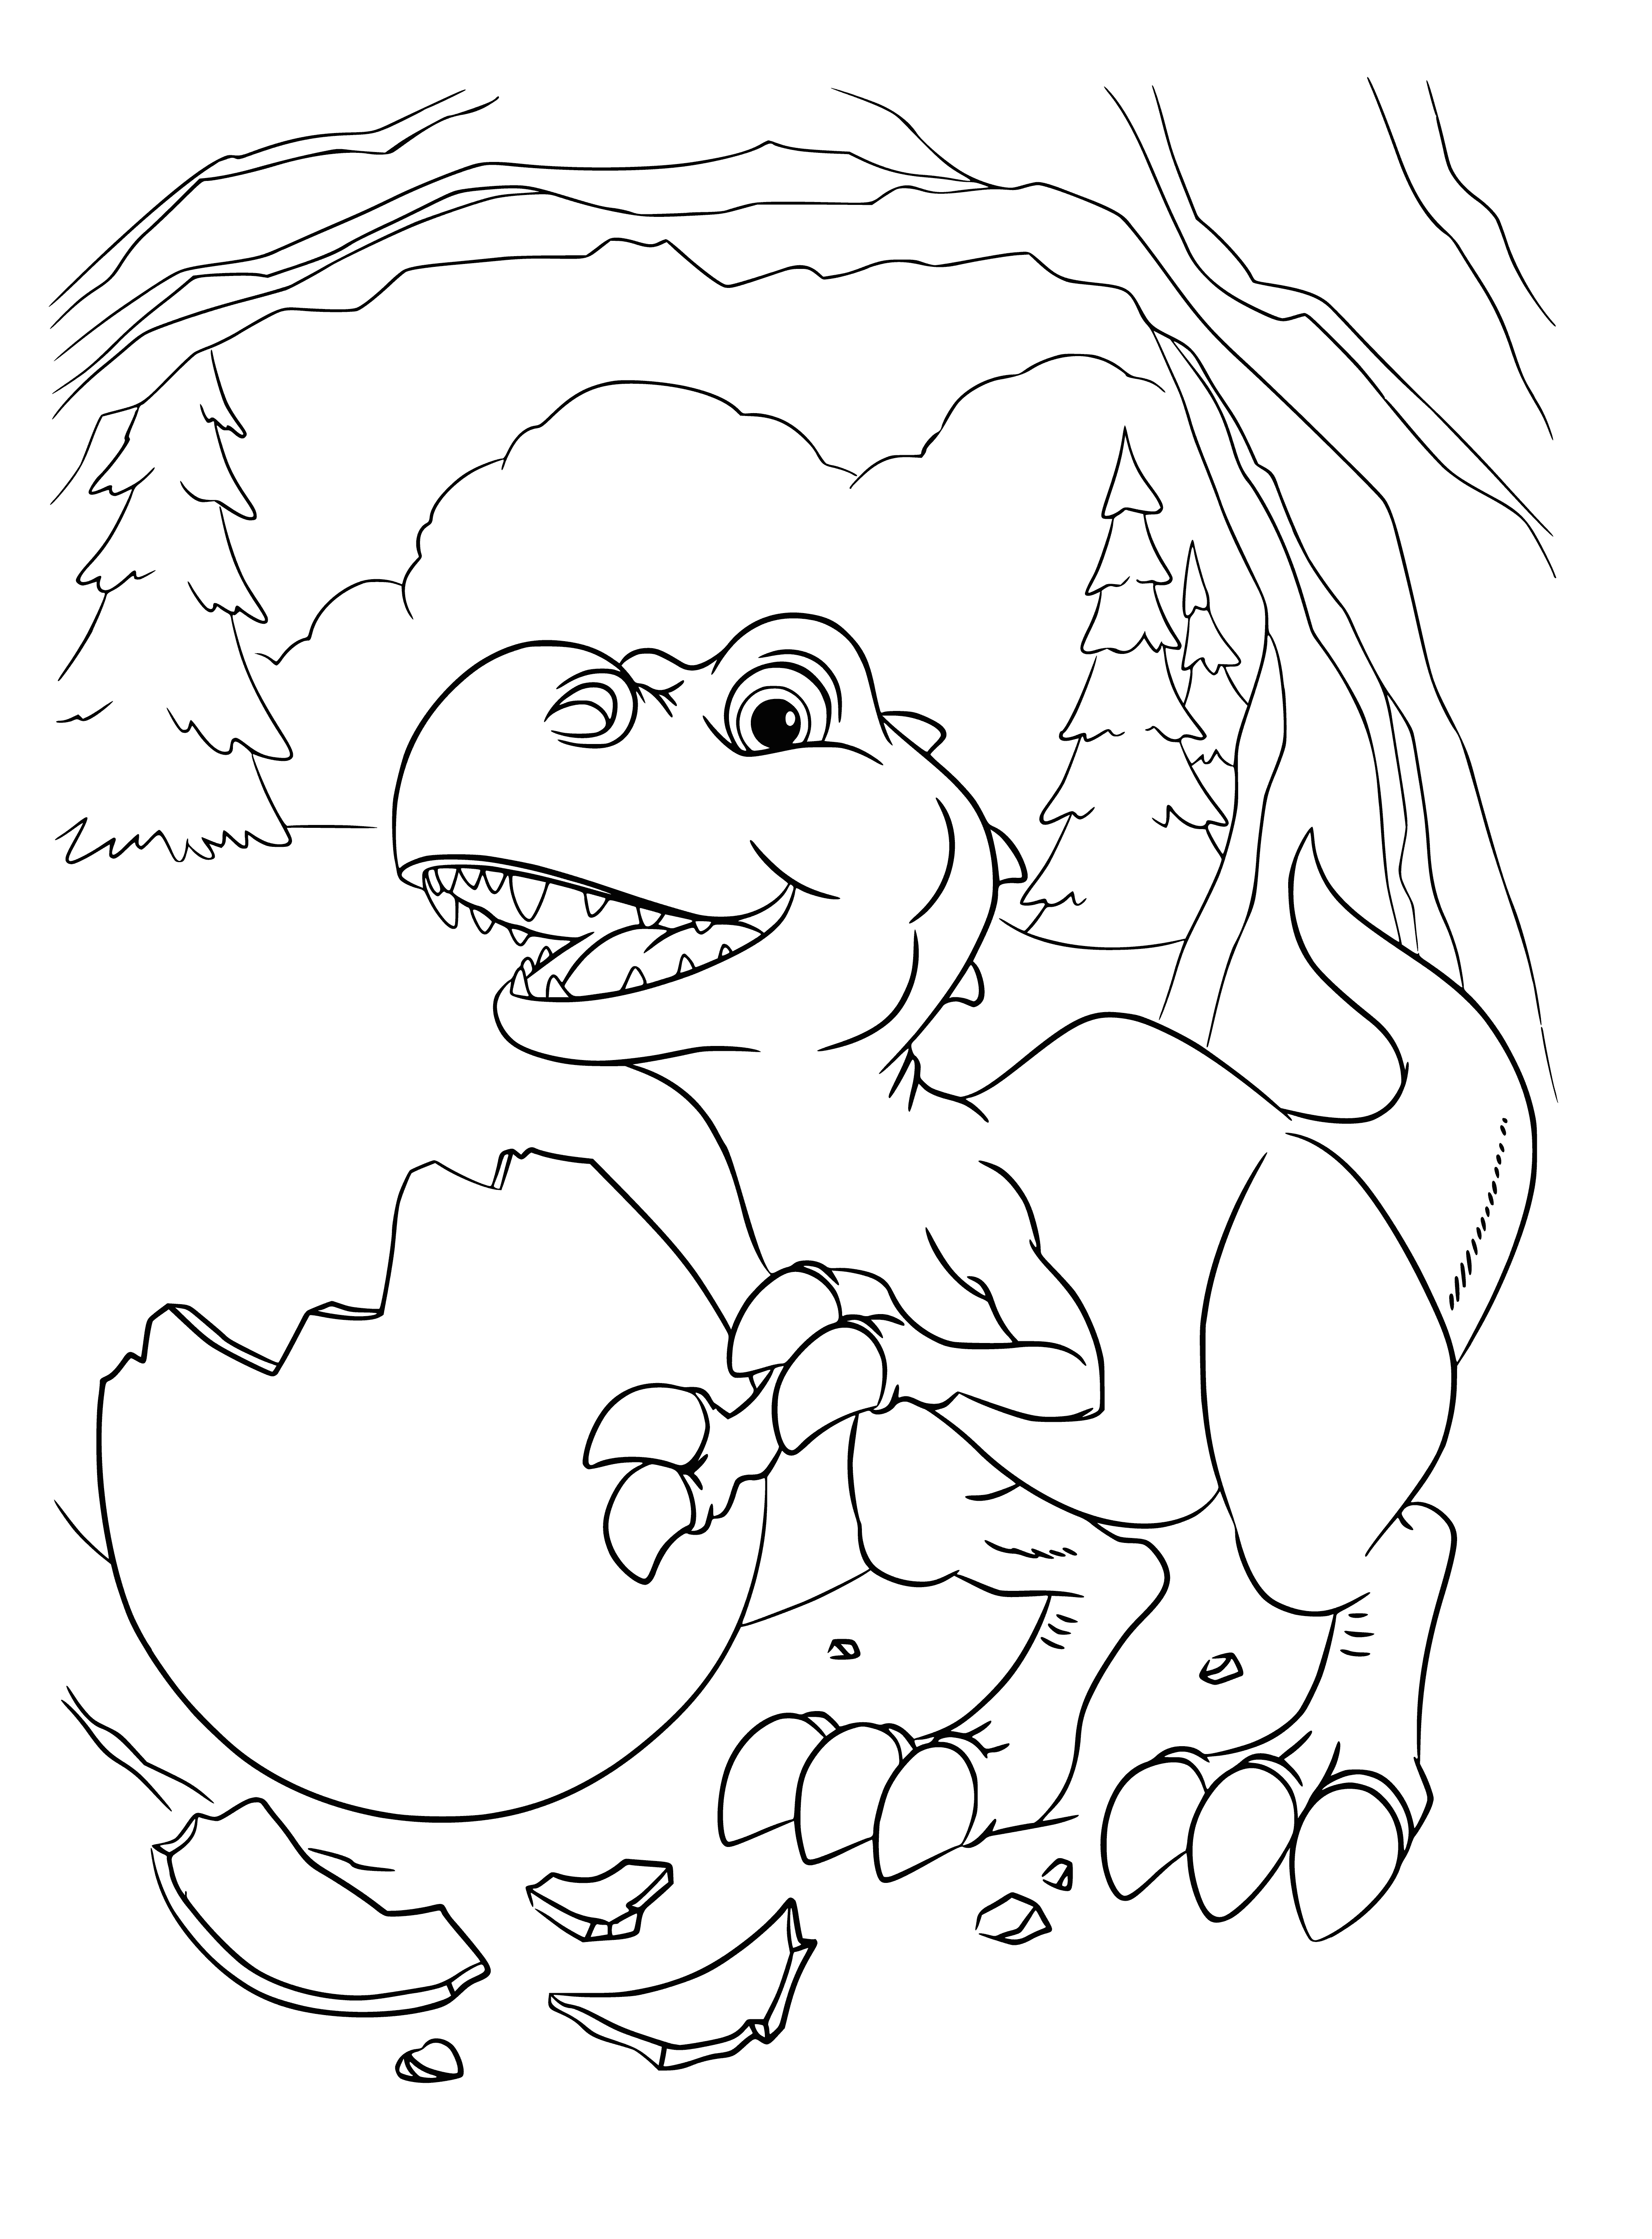 Baby dinosaur coloring page